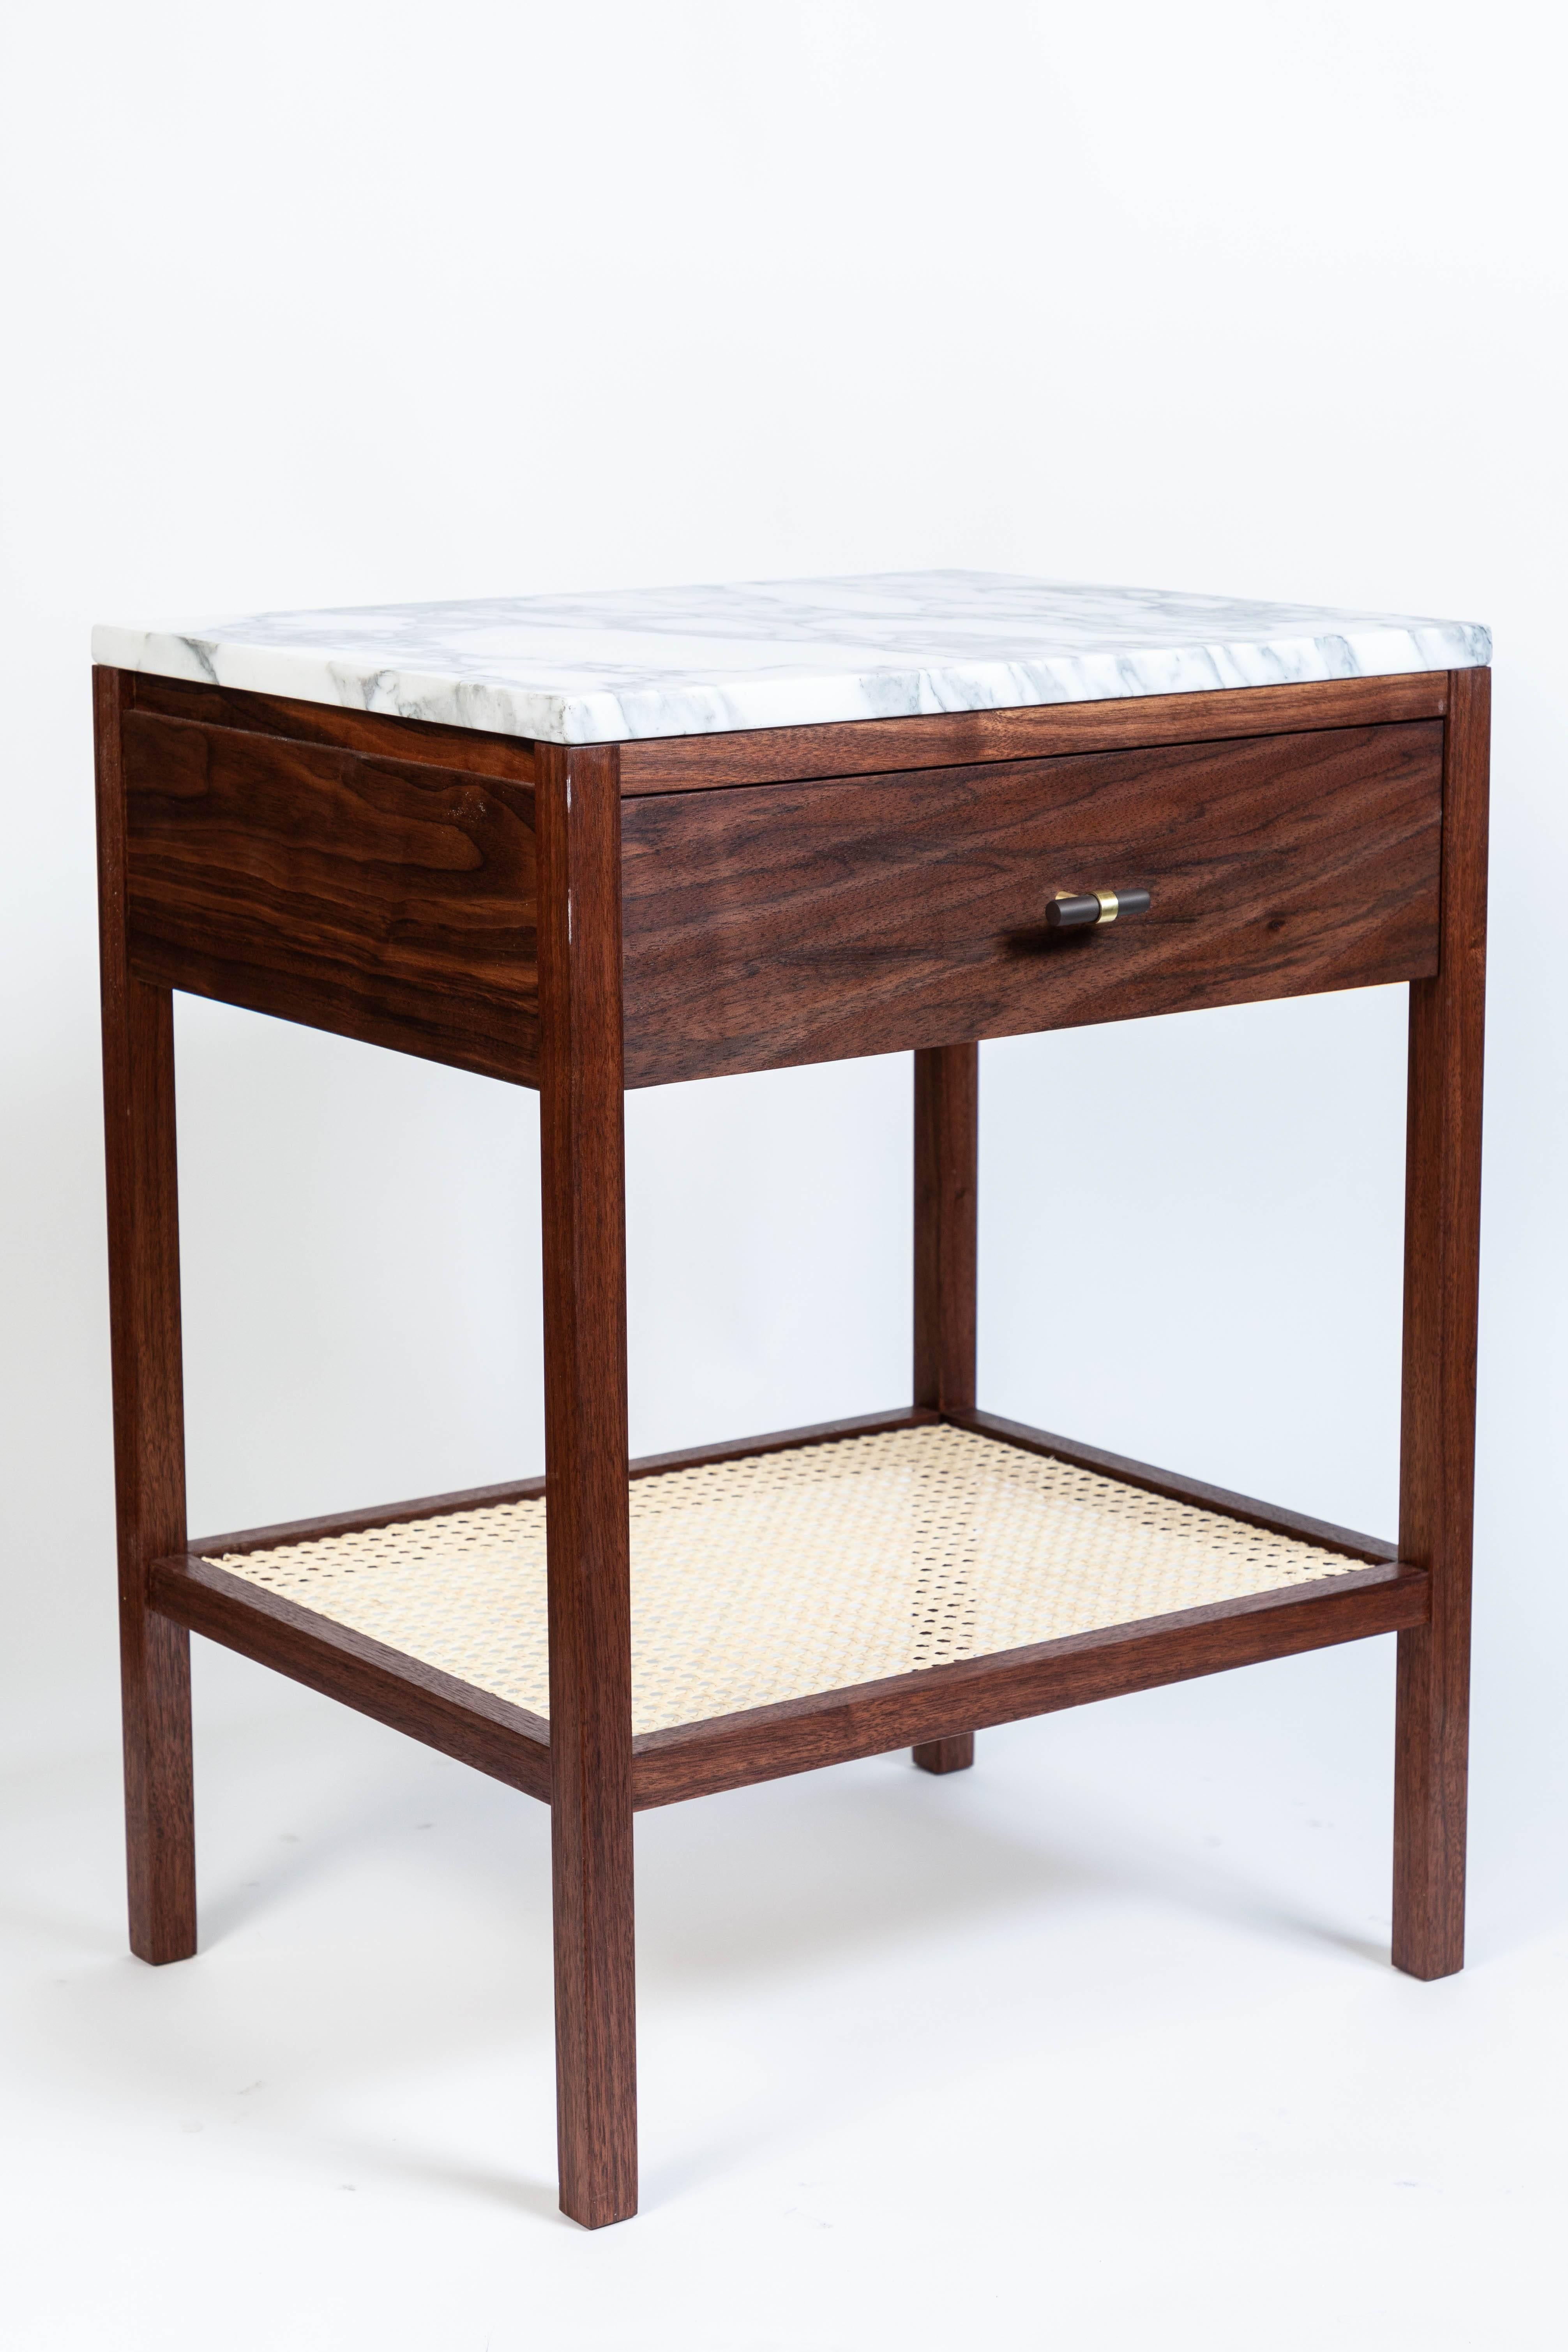 Contemporary Made to Order Walnut Night Stand with a Marble Top and Caned Bottom Shelf 